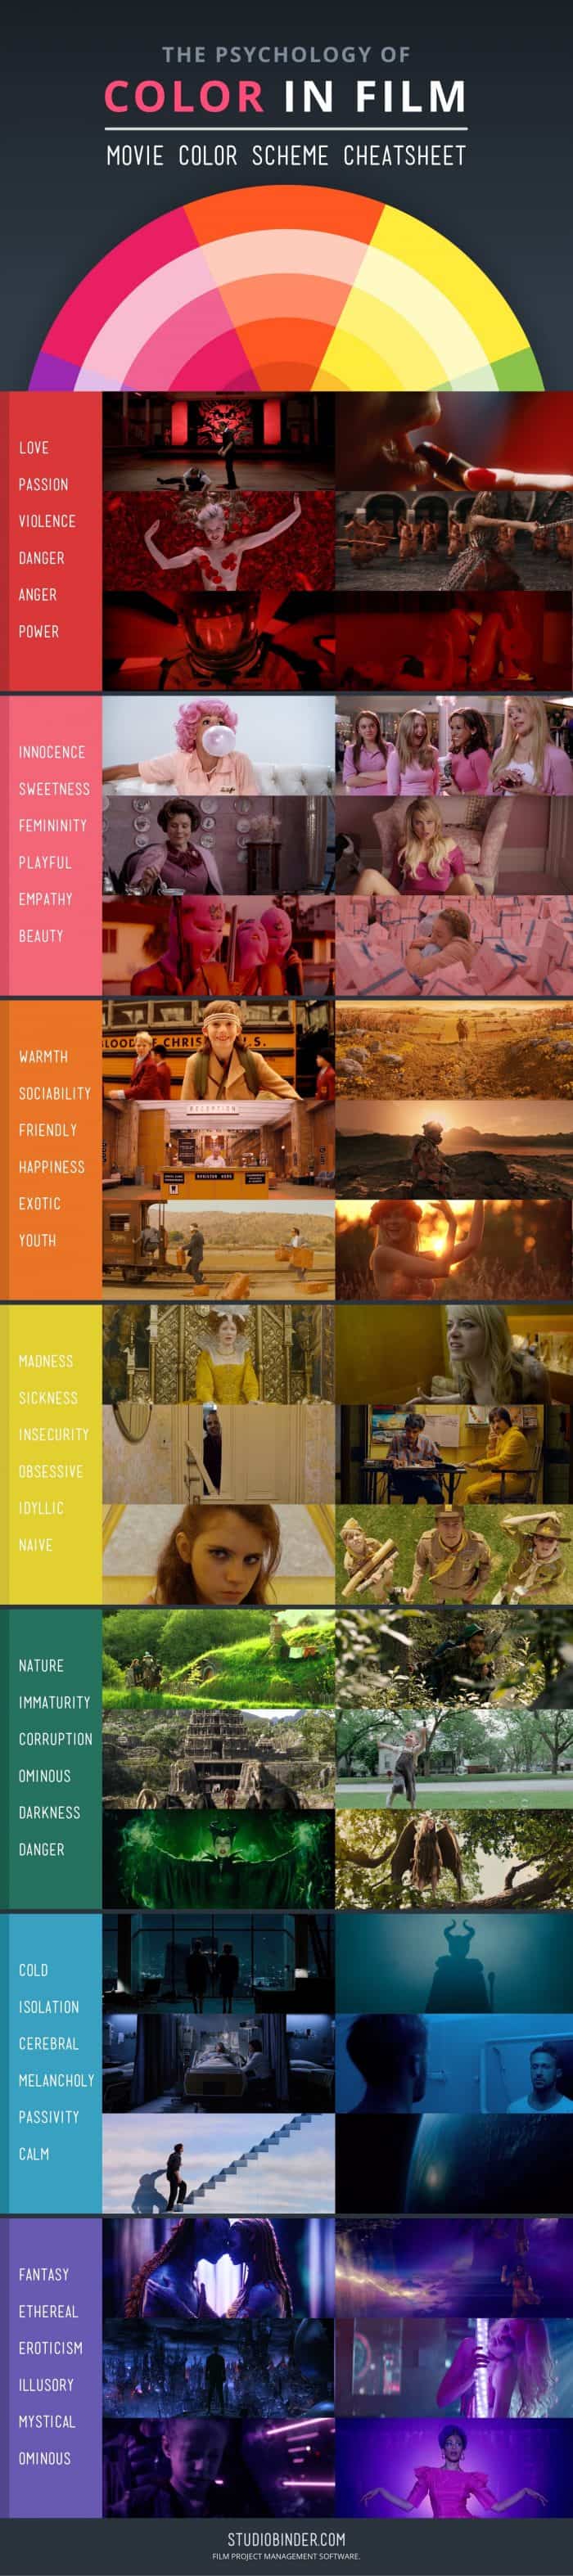 The Psychology Of Color In Film